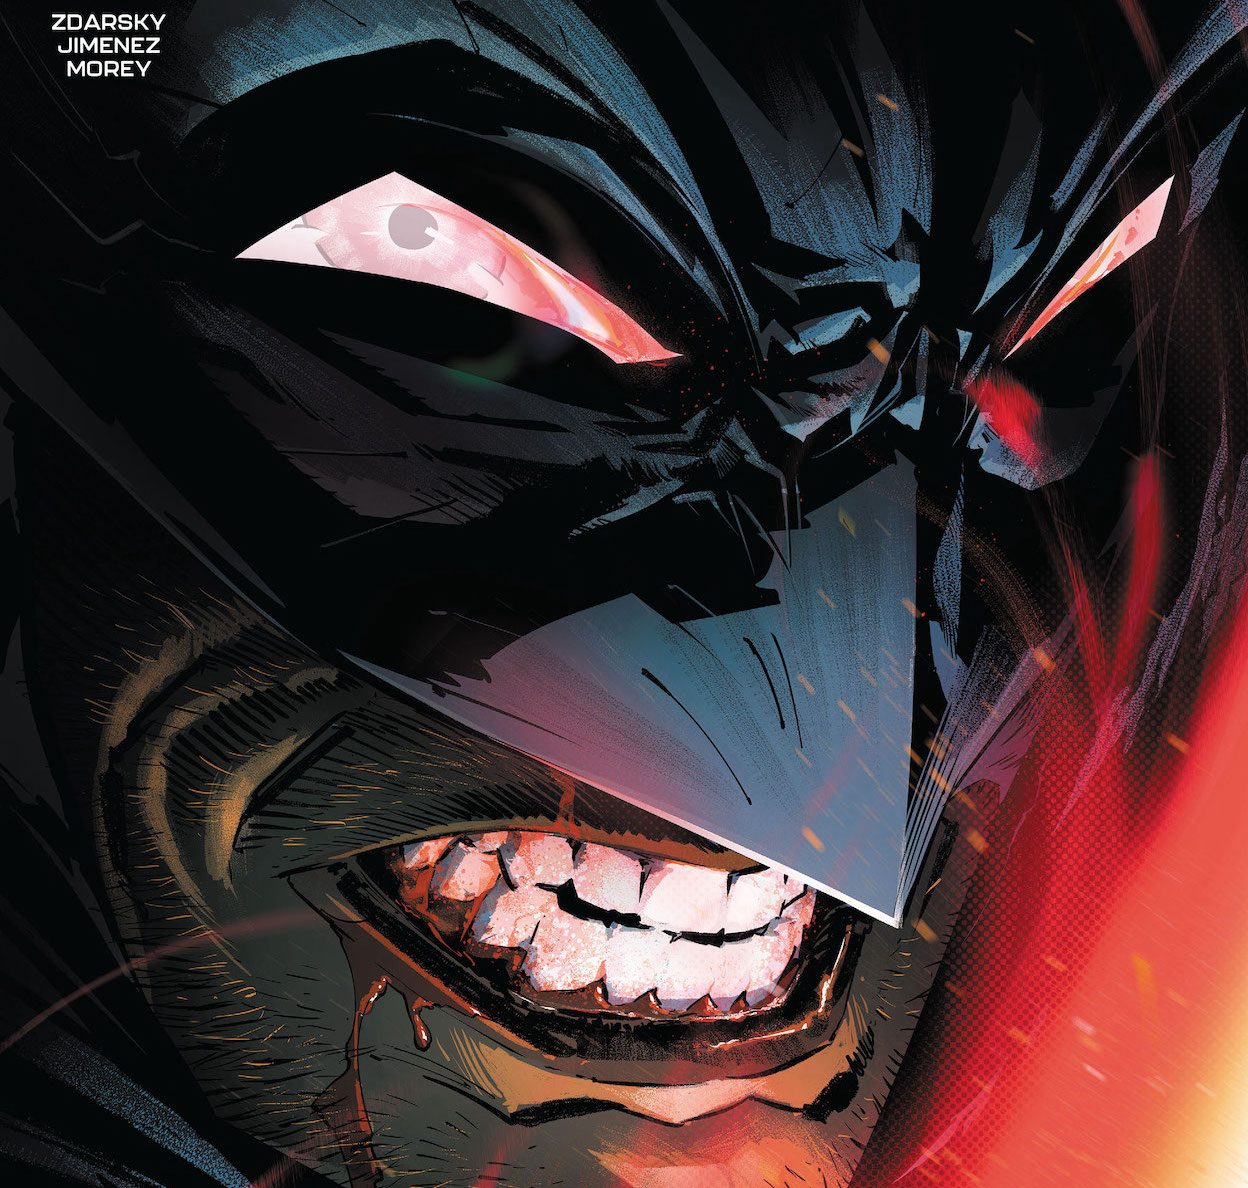 'Batman' #127 honors the past while barreling full steam ahead